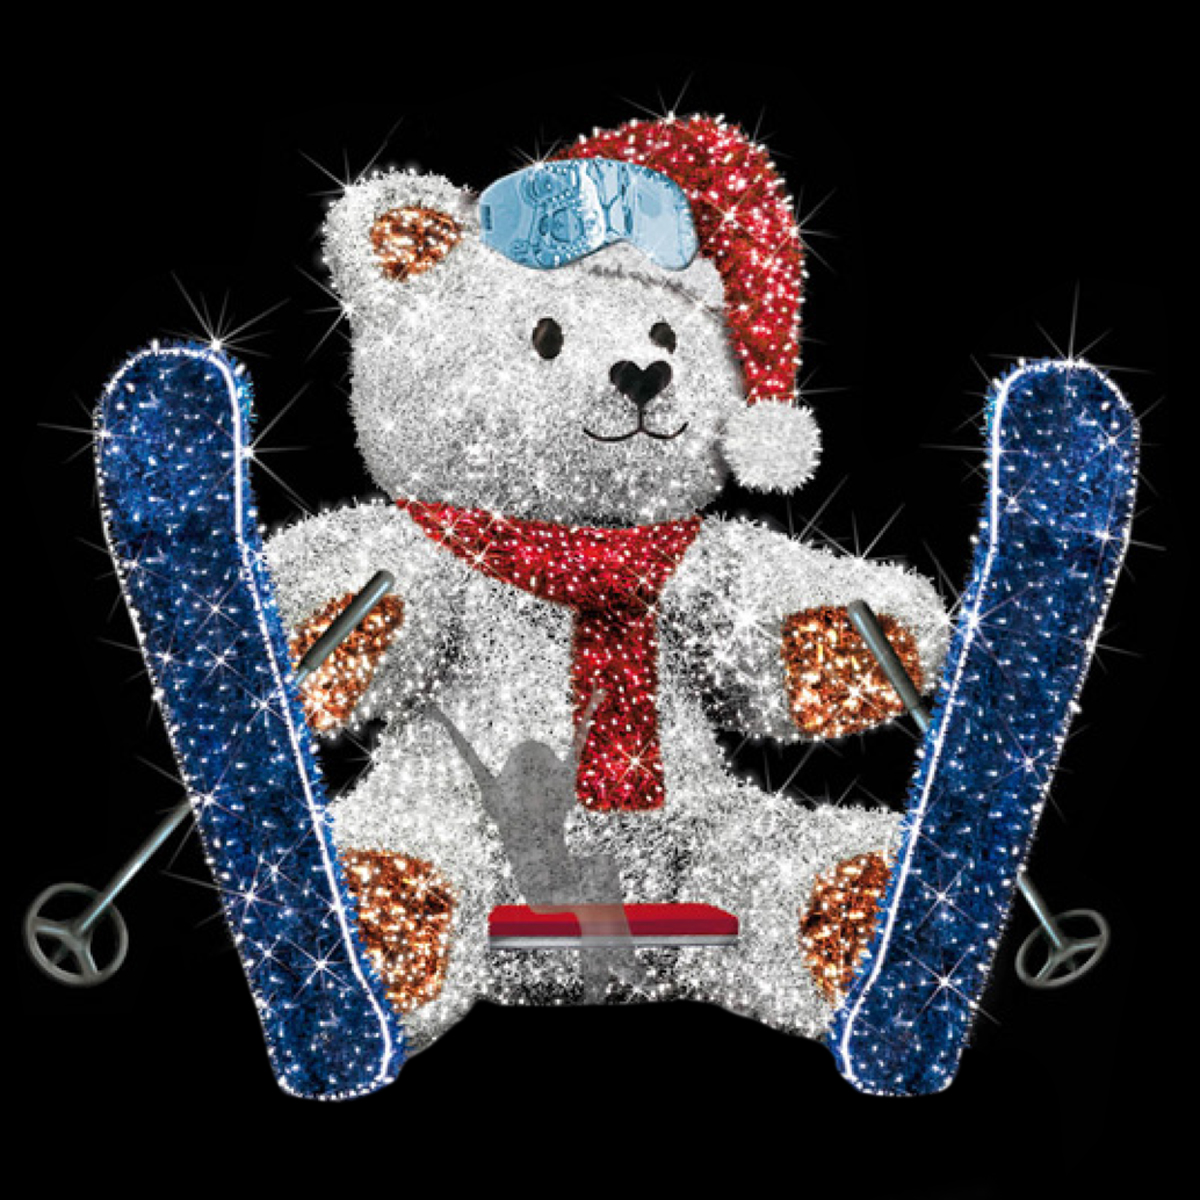 3D Skier Teddy Bear - Deluxe Large Commercial Christmas Display - 14.8ft Tall